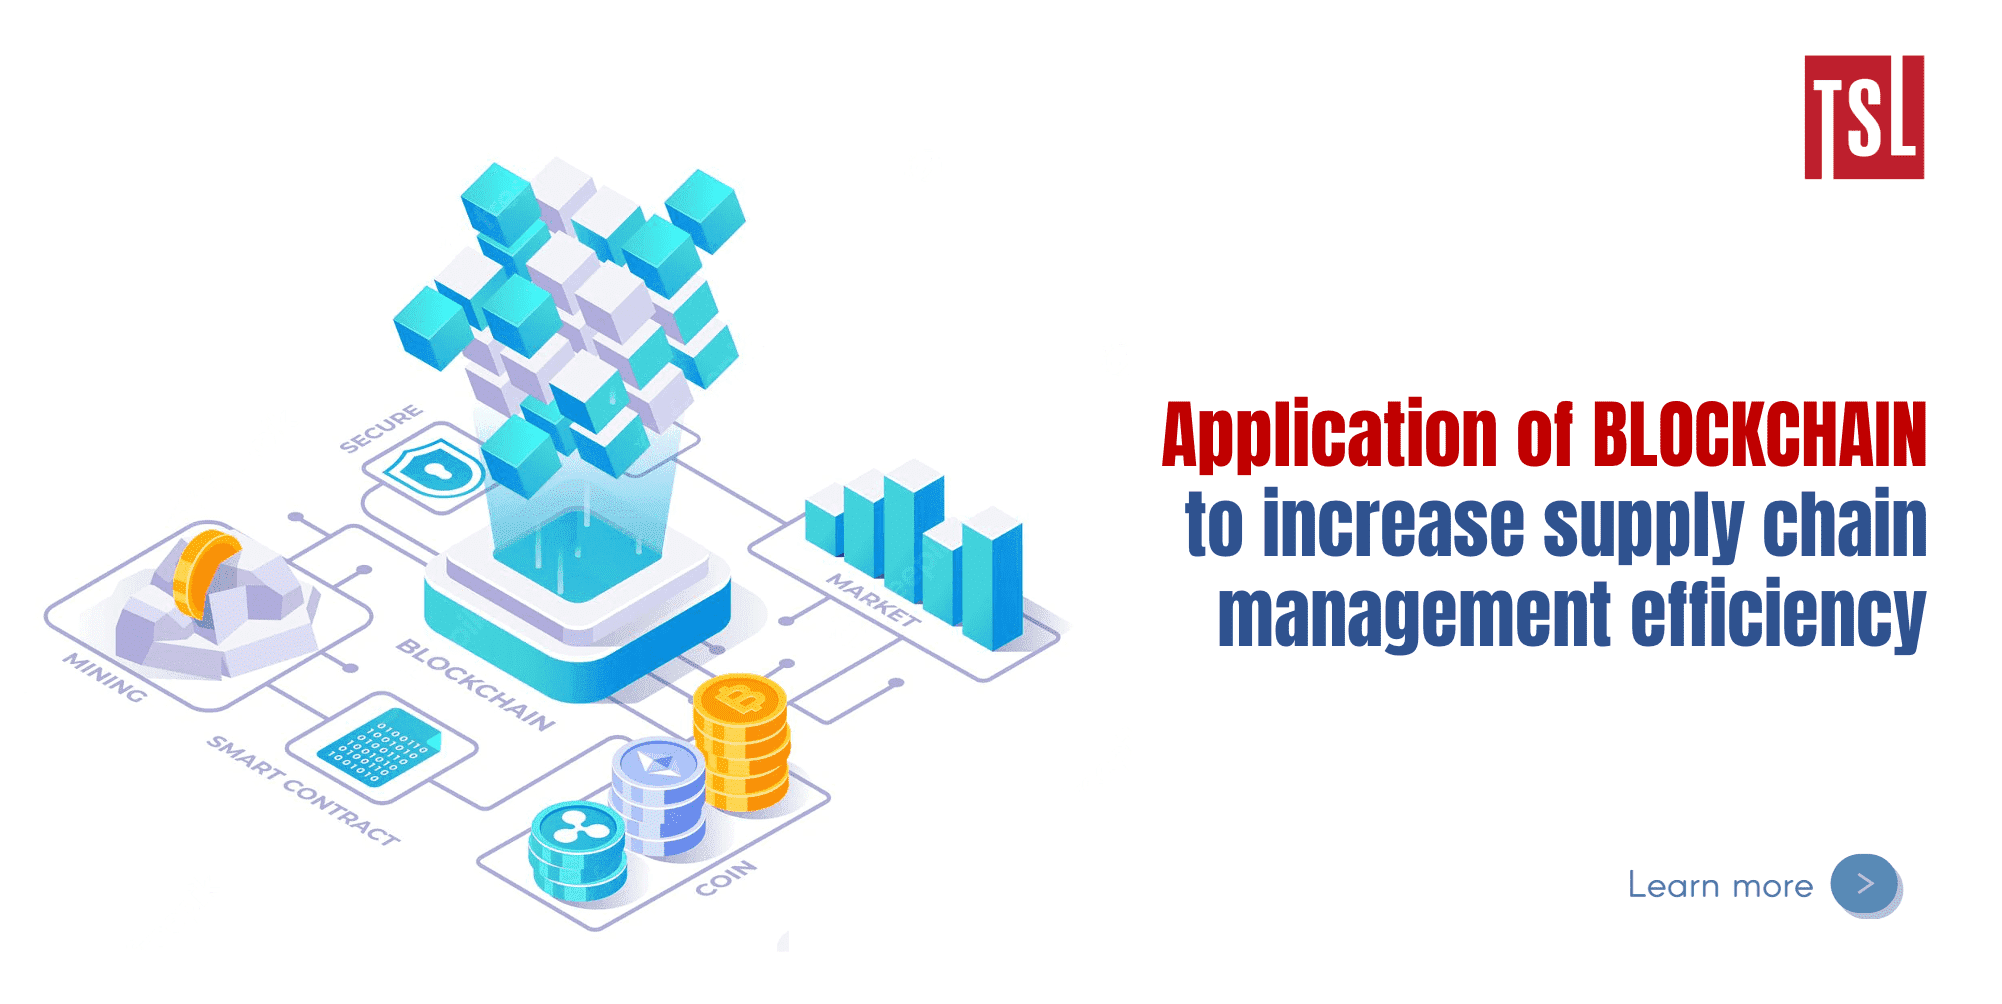 Application of Blockchain to increase supply chain management efficiency